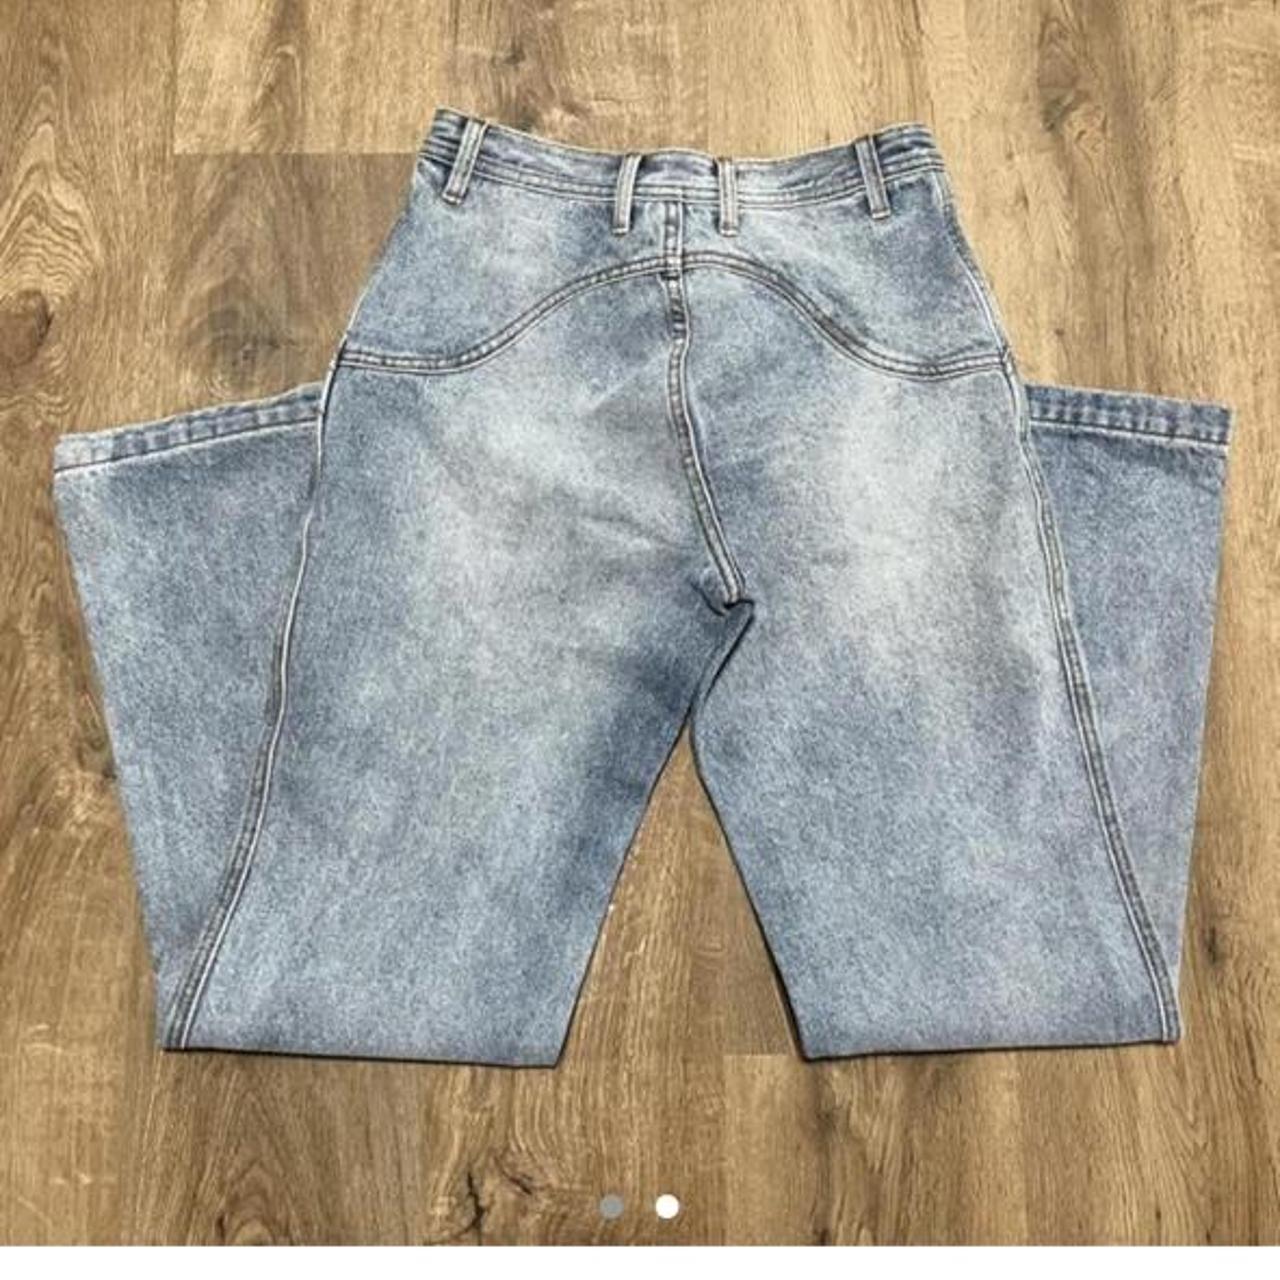 Brandy addison jeans!!! these r repops and have... - Depop